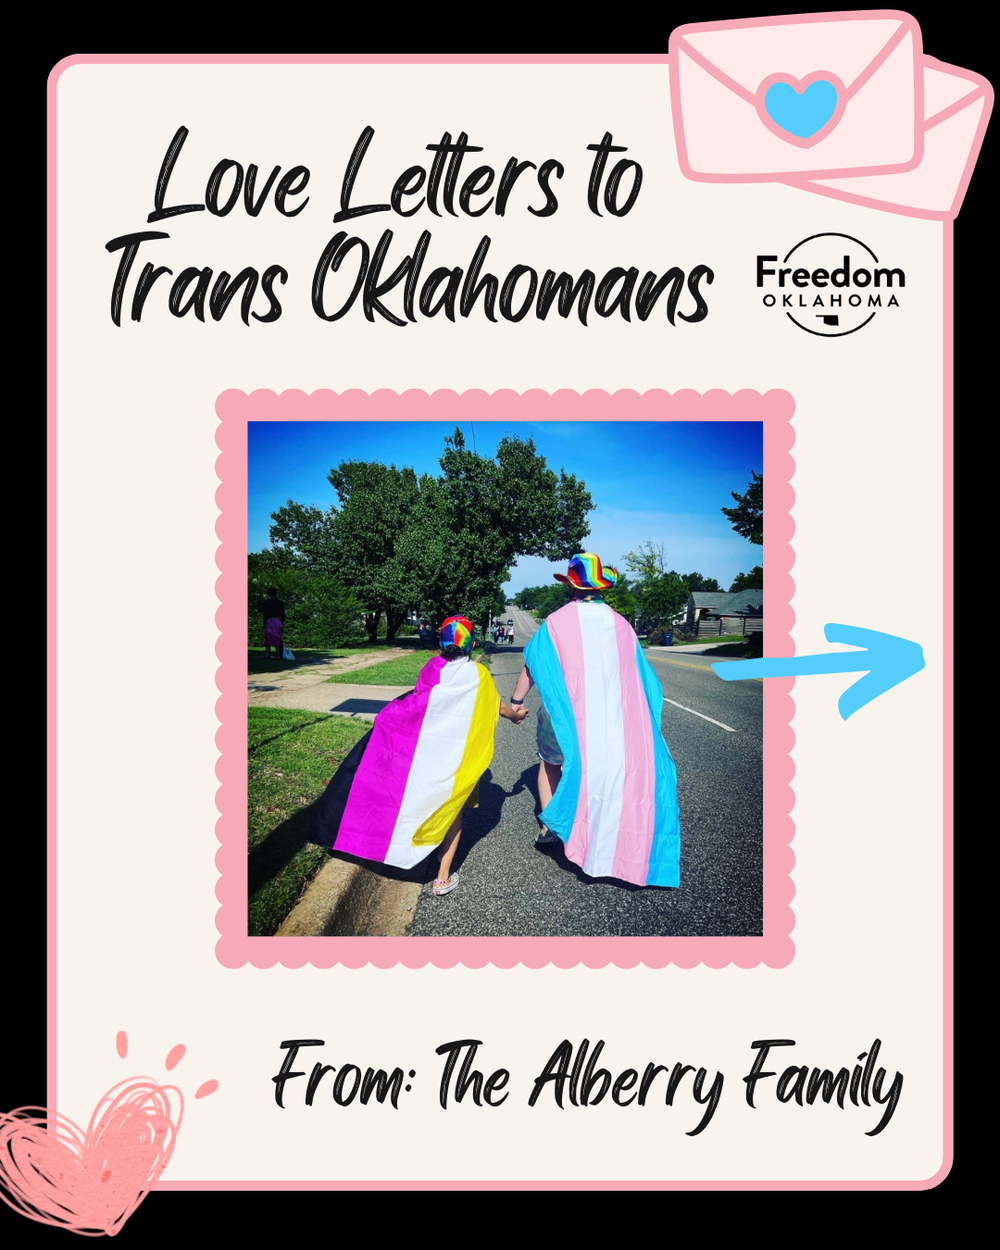  "Love Letters to Trans Oklahomans From: The Alberry Family" on a black, pink, blue, and beige graphic. In the center is an image of a child and an adult holding hands in the street. You can only see their backs--they're wearing the non-binary pride 